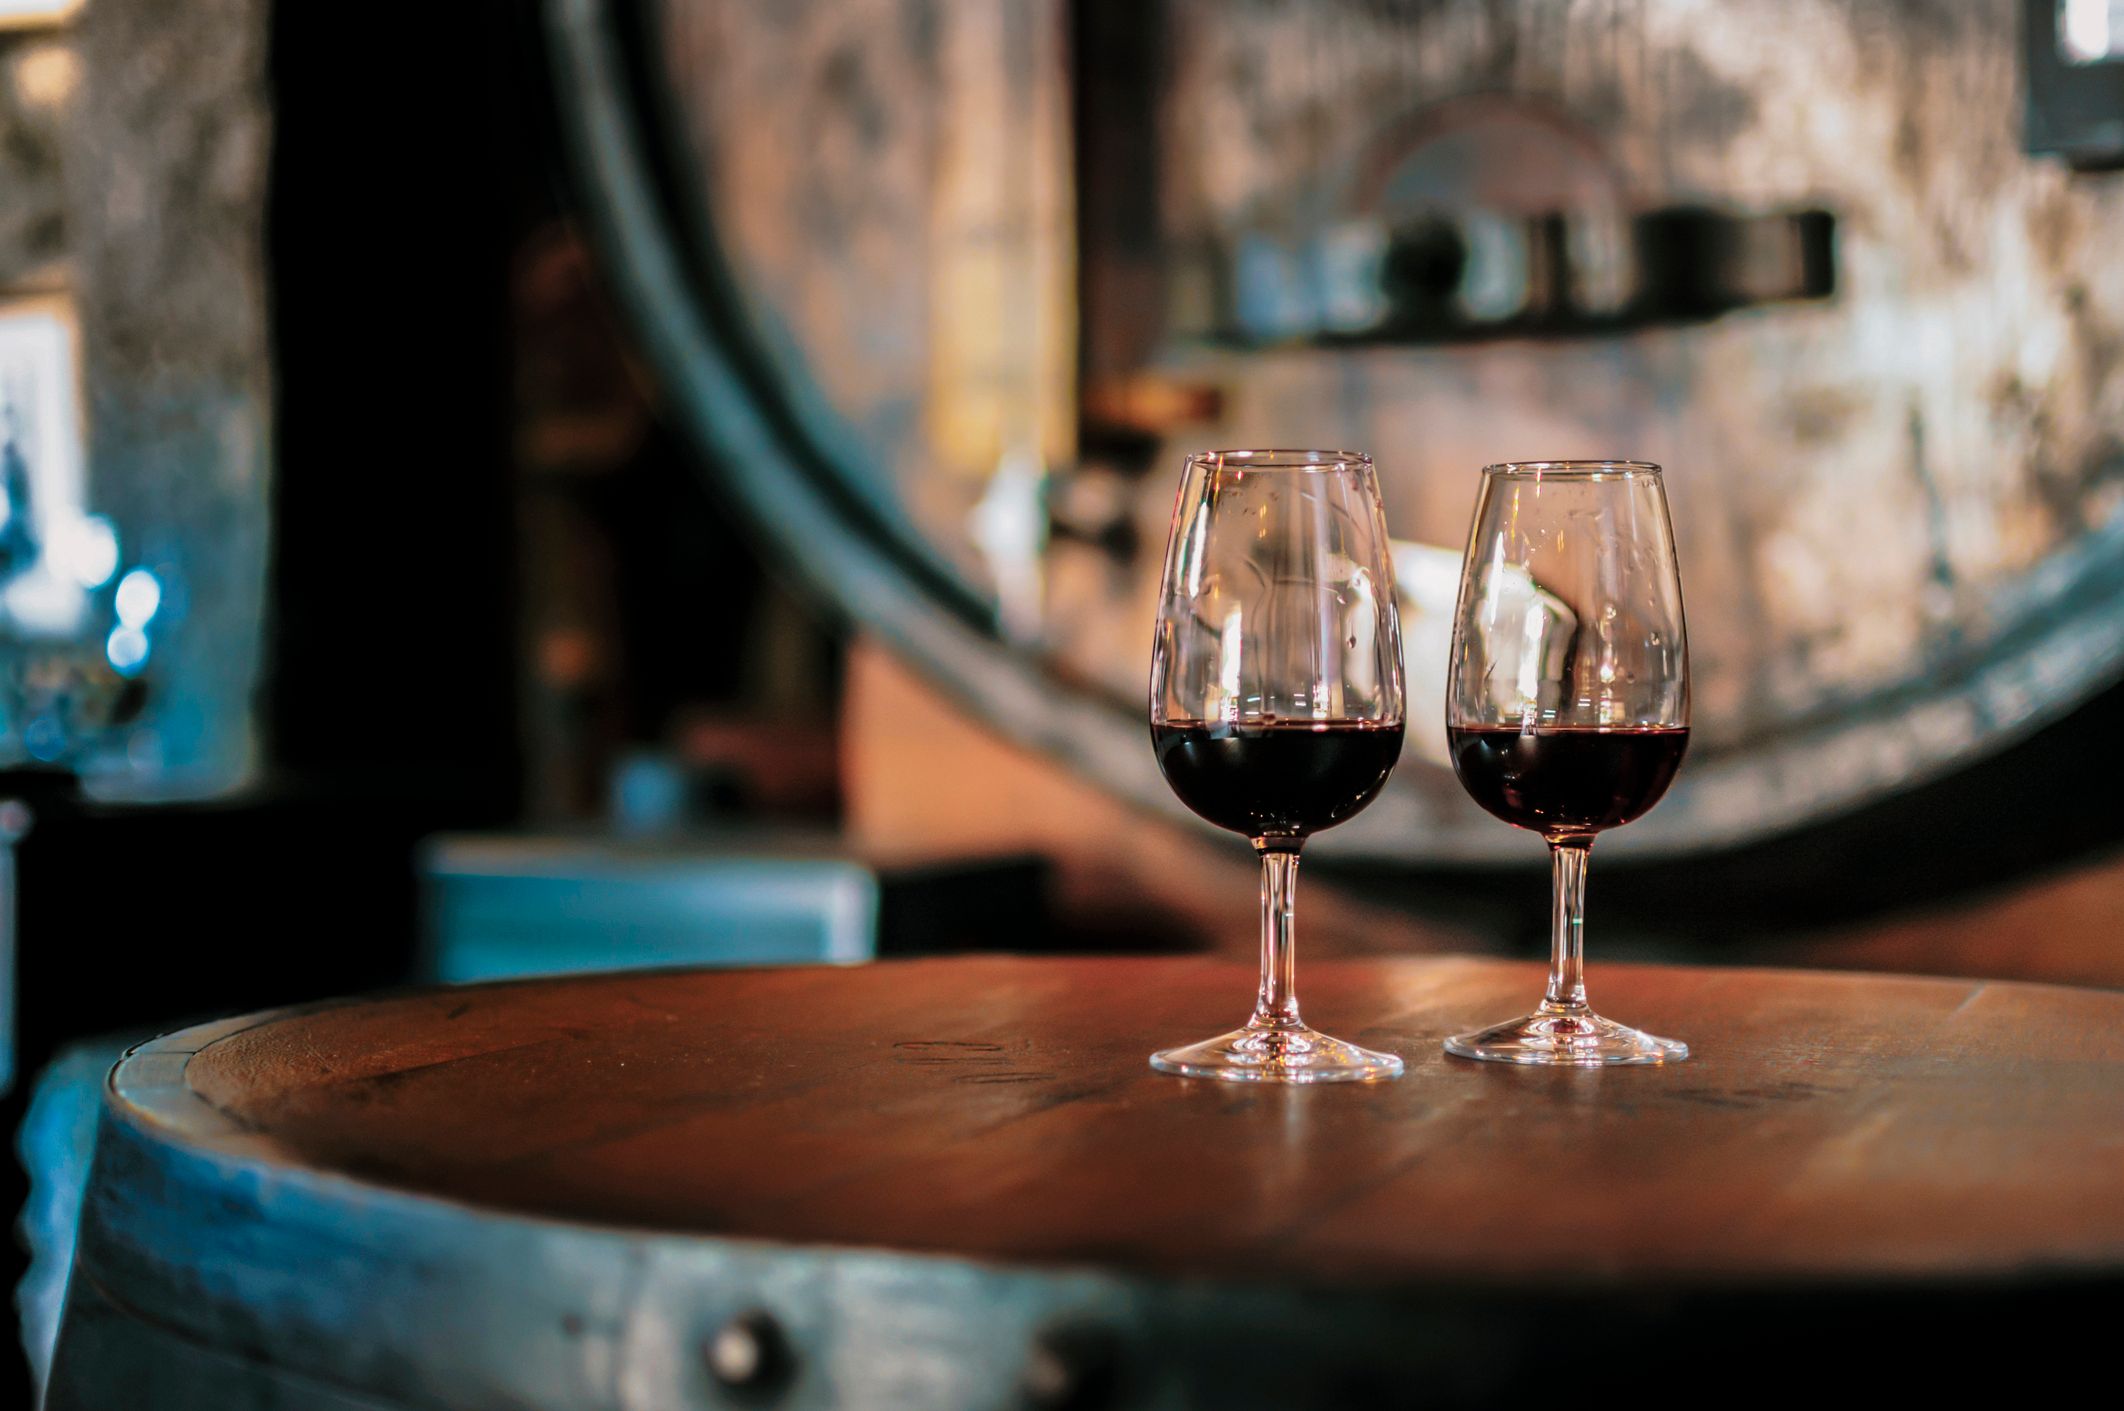 Close-Up Of Alcoholic Drinks Served On Wooden Table In Restaurant. | Foto von: Stock-Fotografie via Getty Images